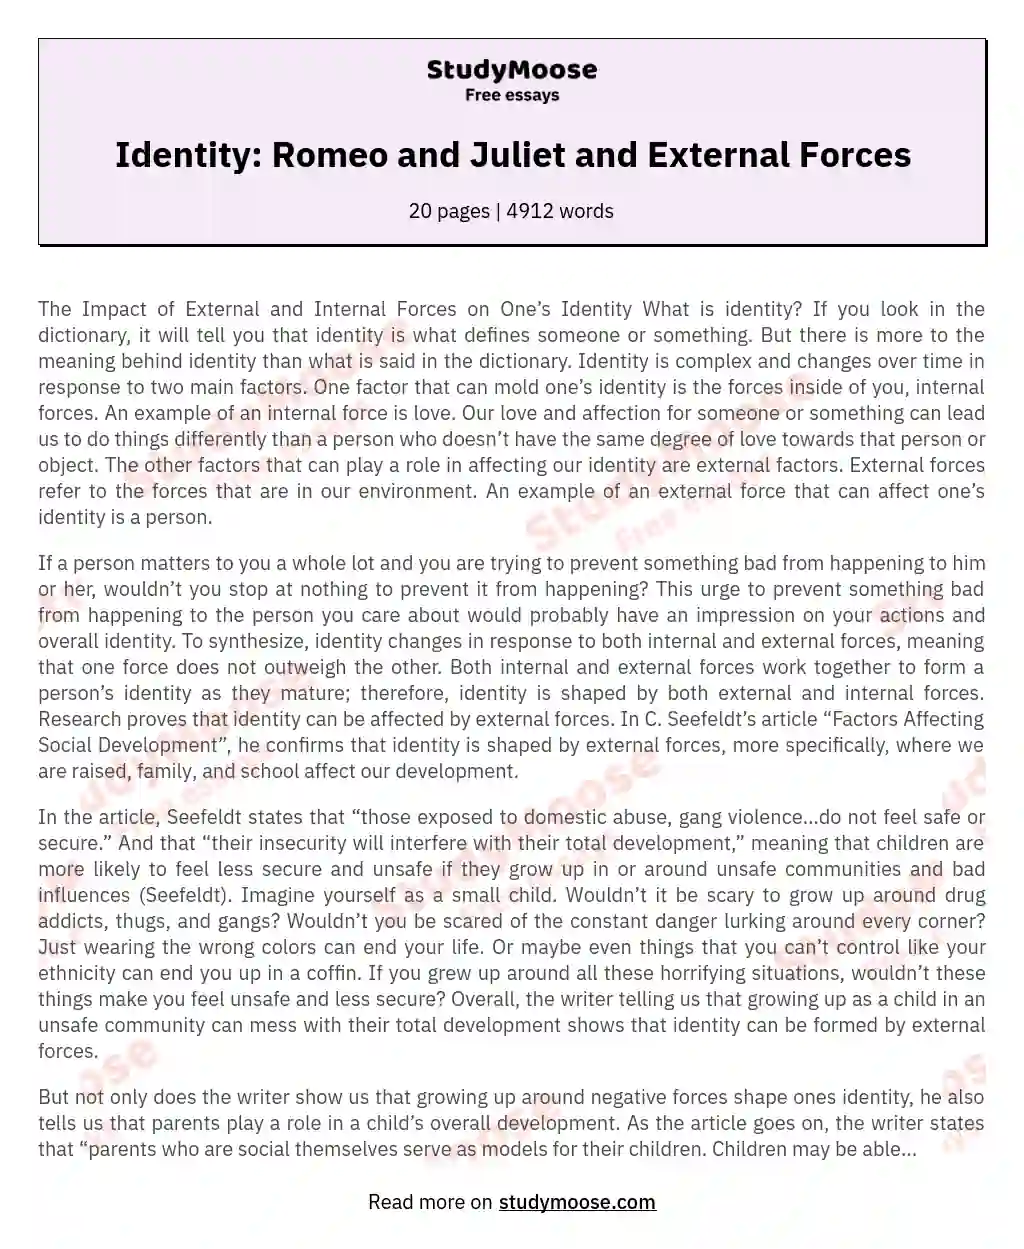 Identity: Romeo and Juliet and External Forces